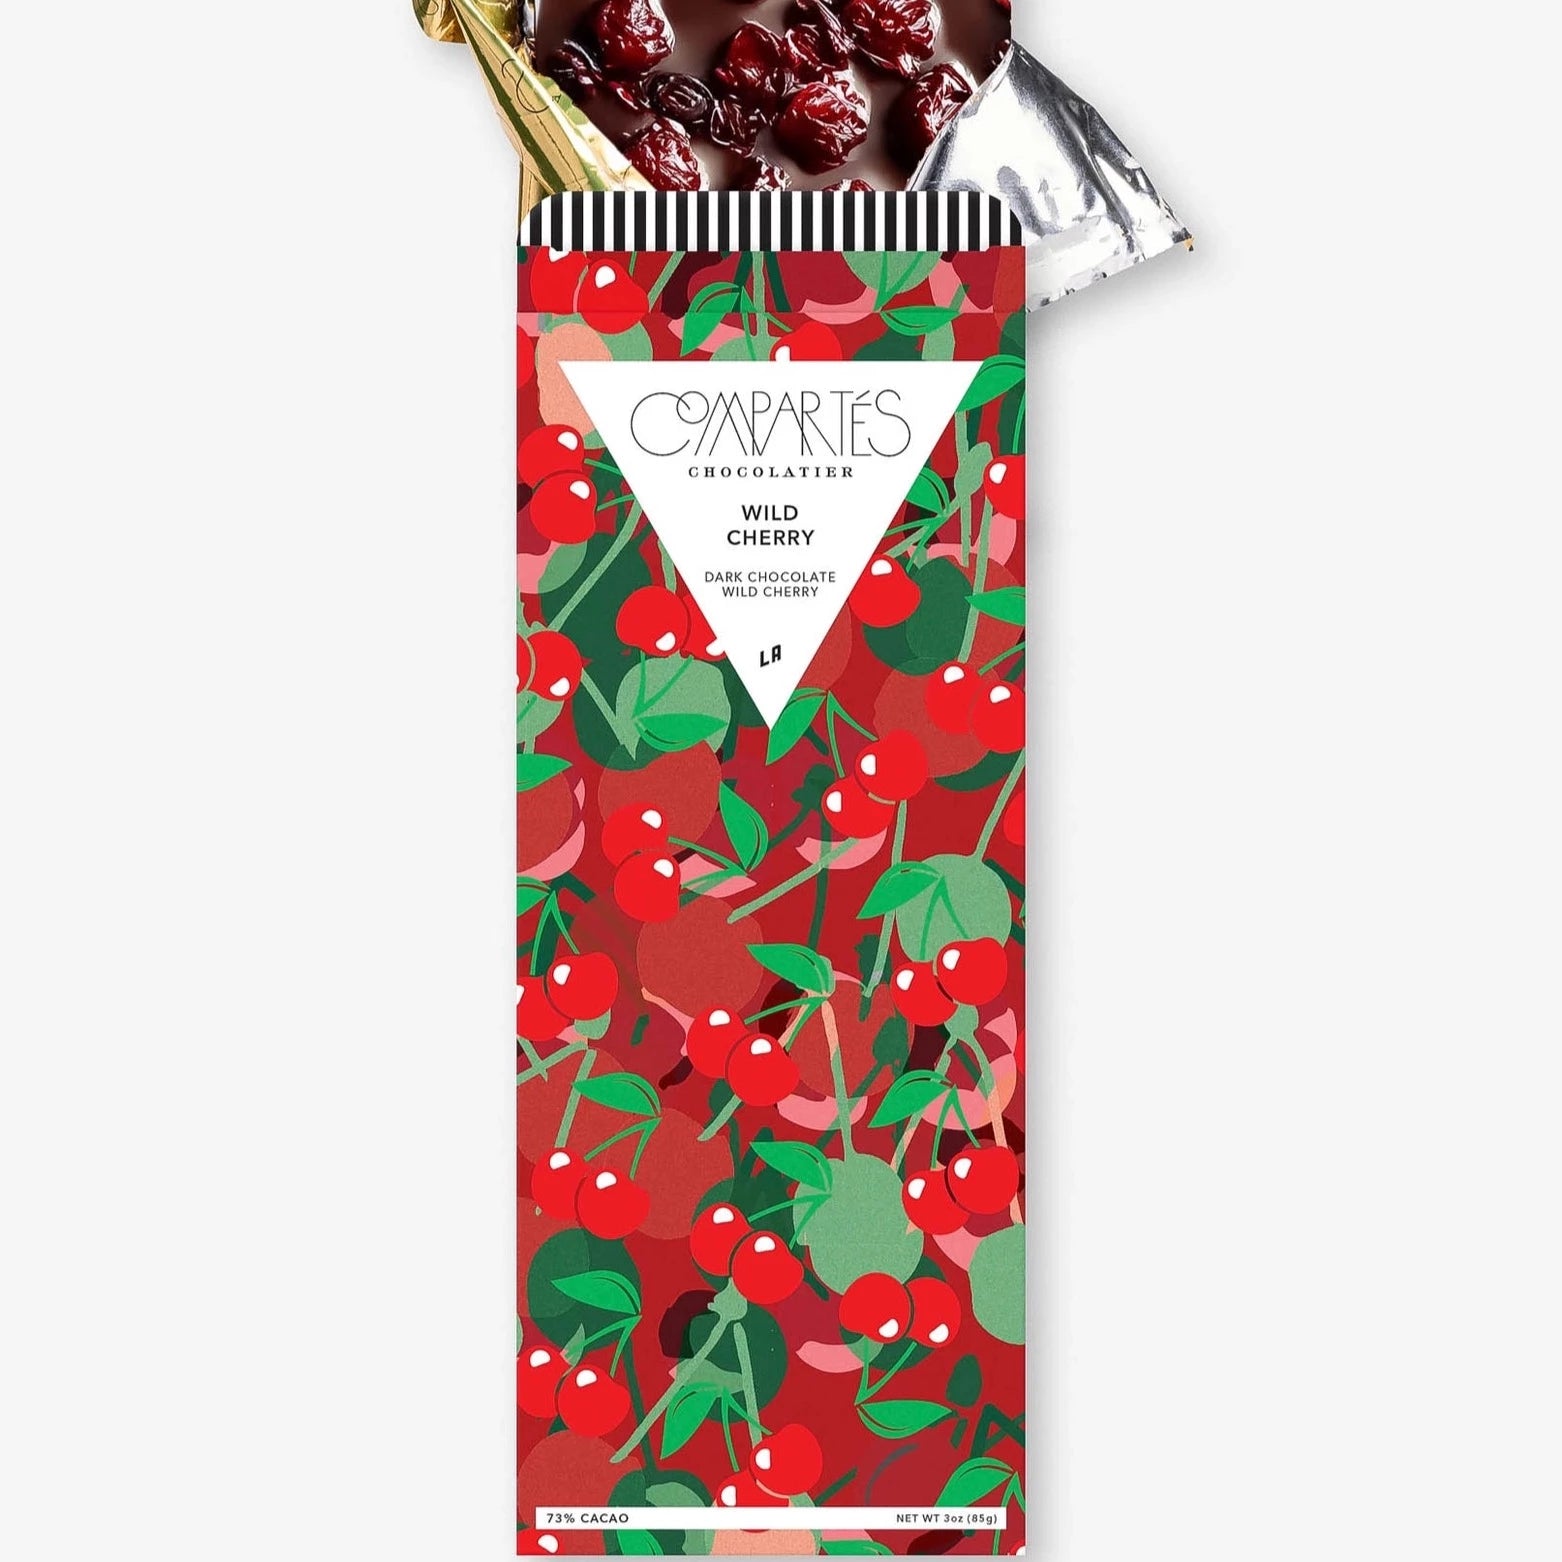 chocolate bar with outside packaging having red cherry graphics printed all over it. cherries are red with green stems